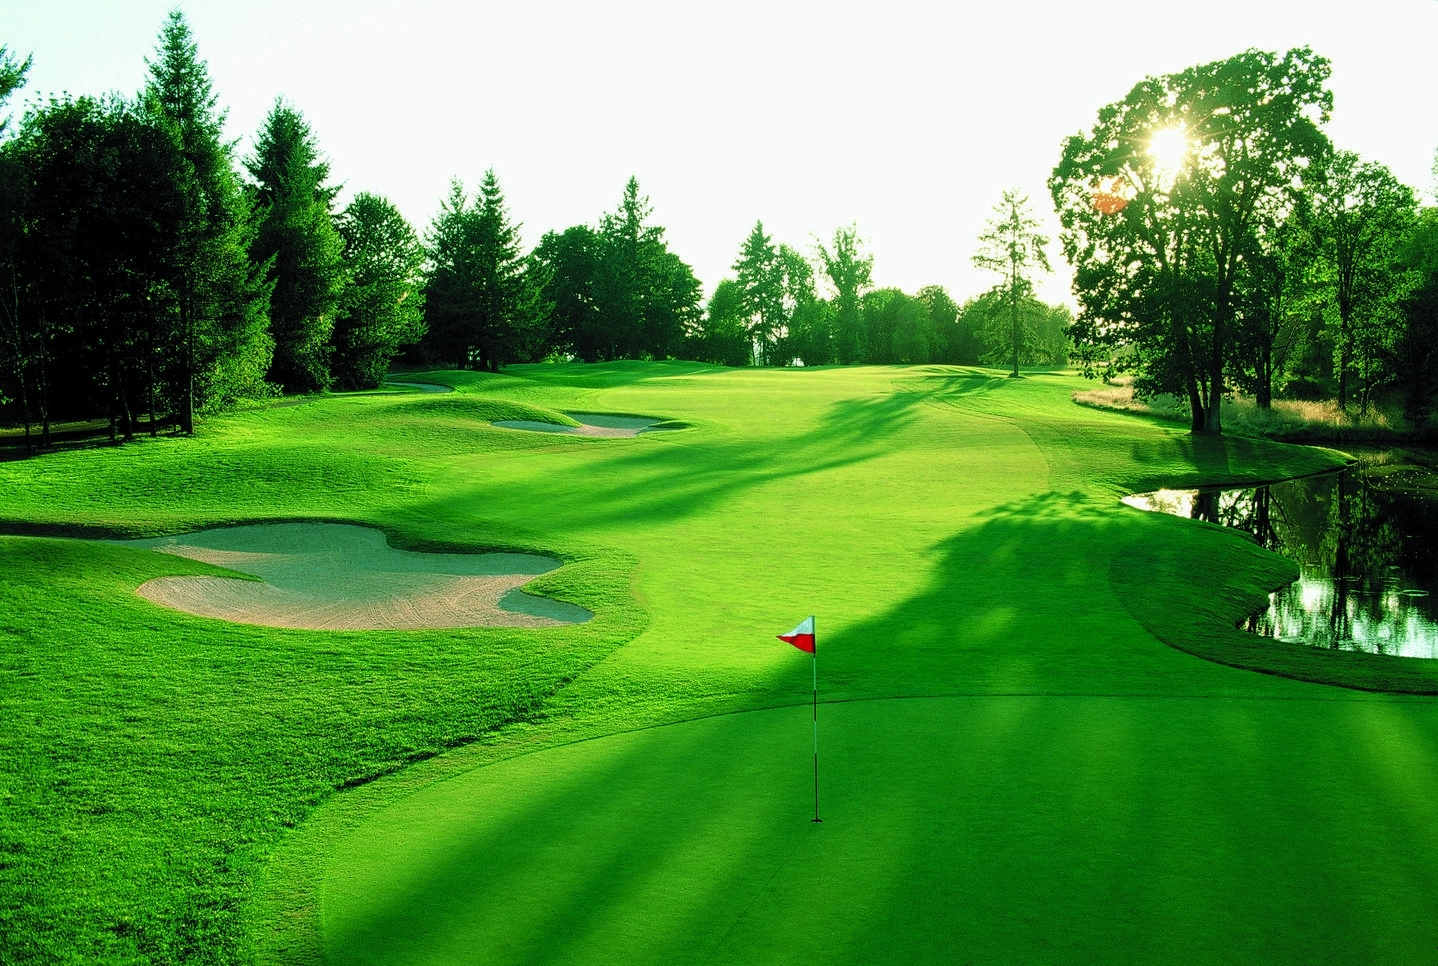 10 Latest Golf Course Background Images FULL HD 1080p For PC Background